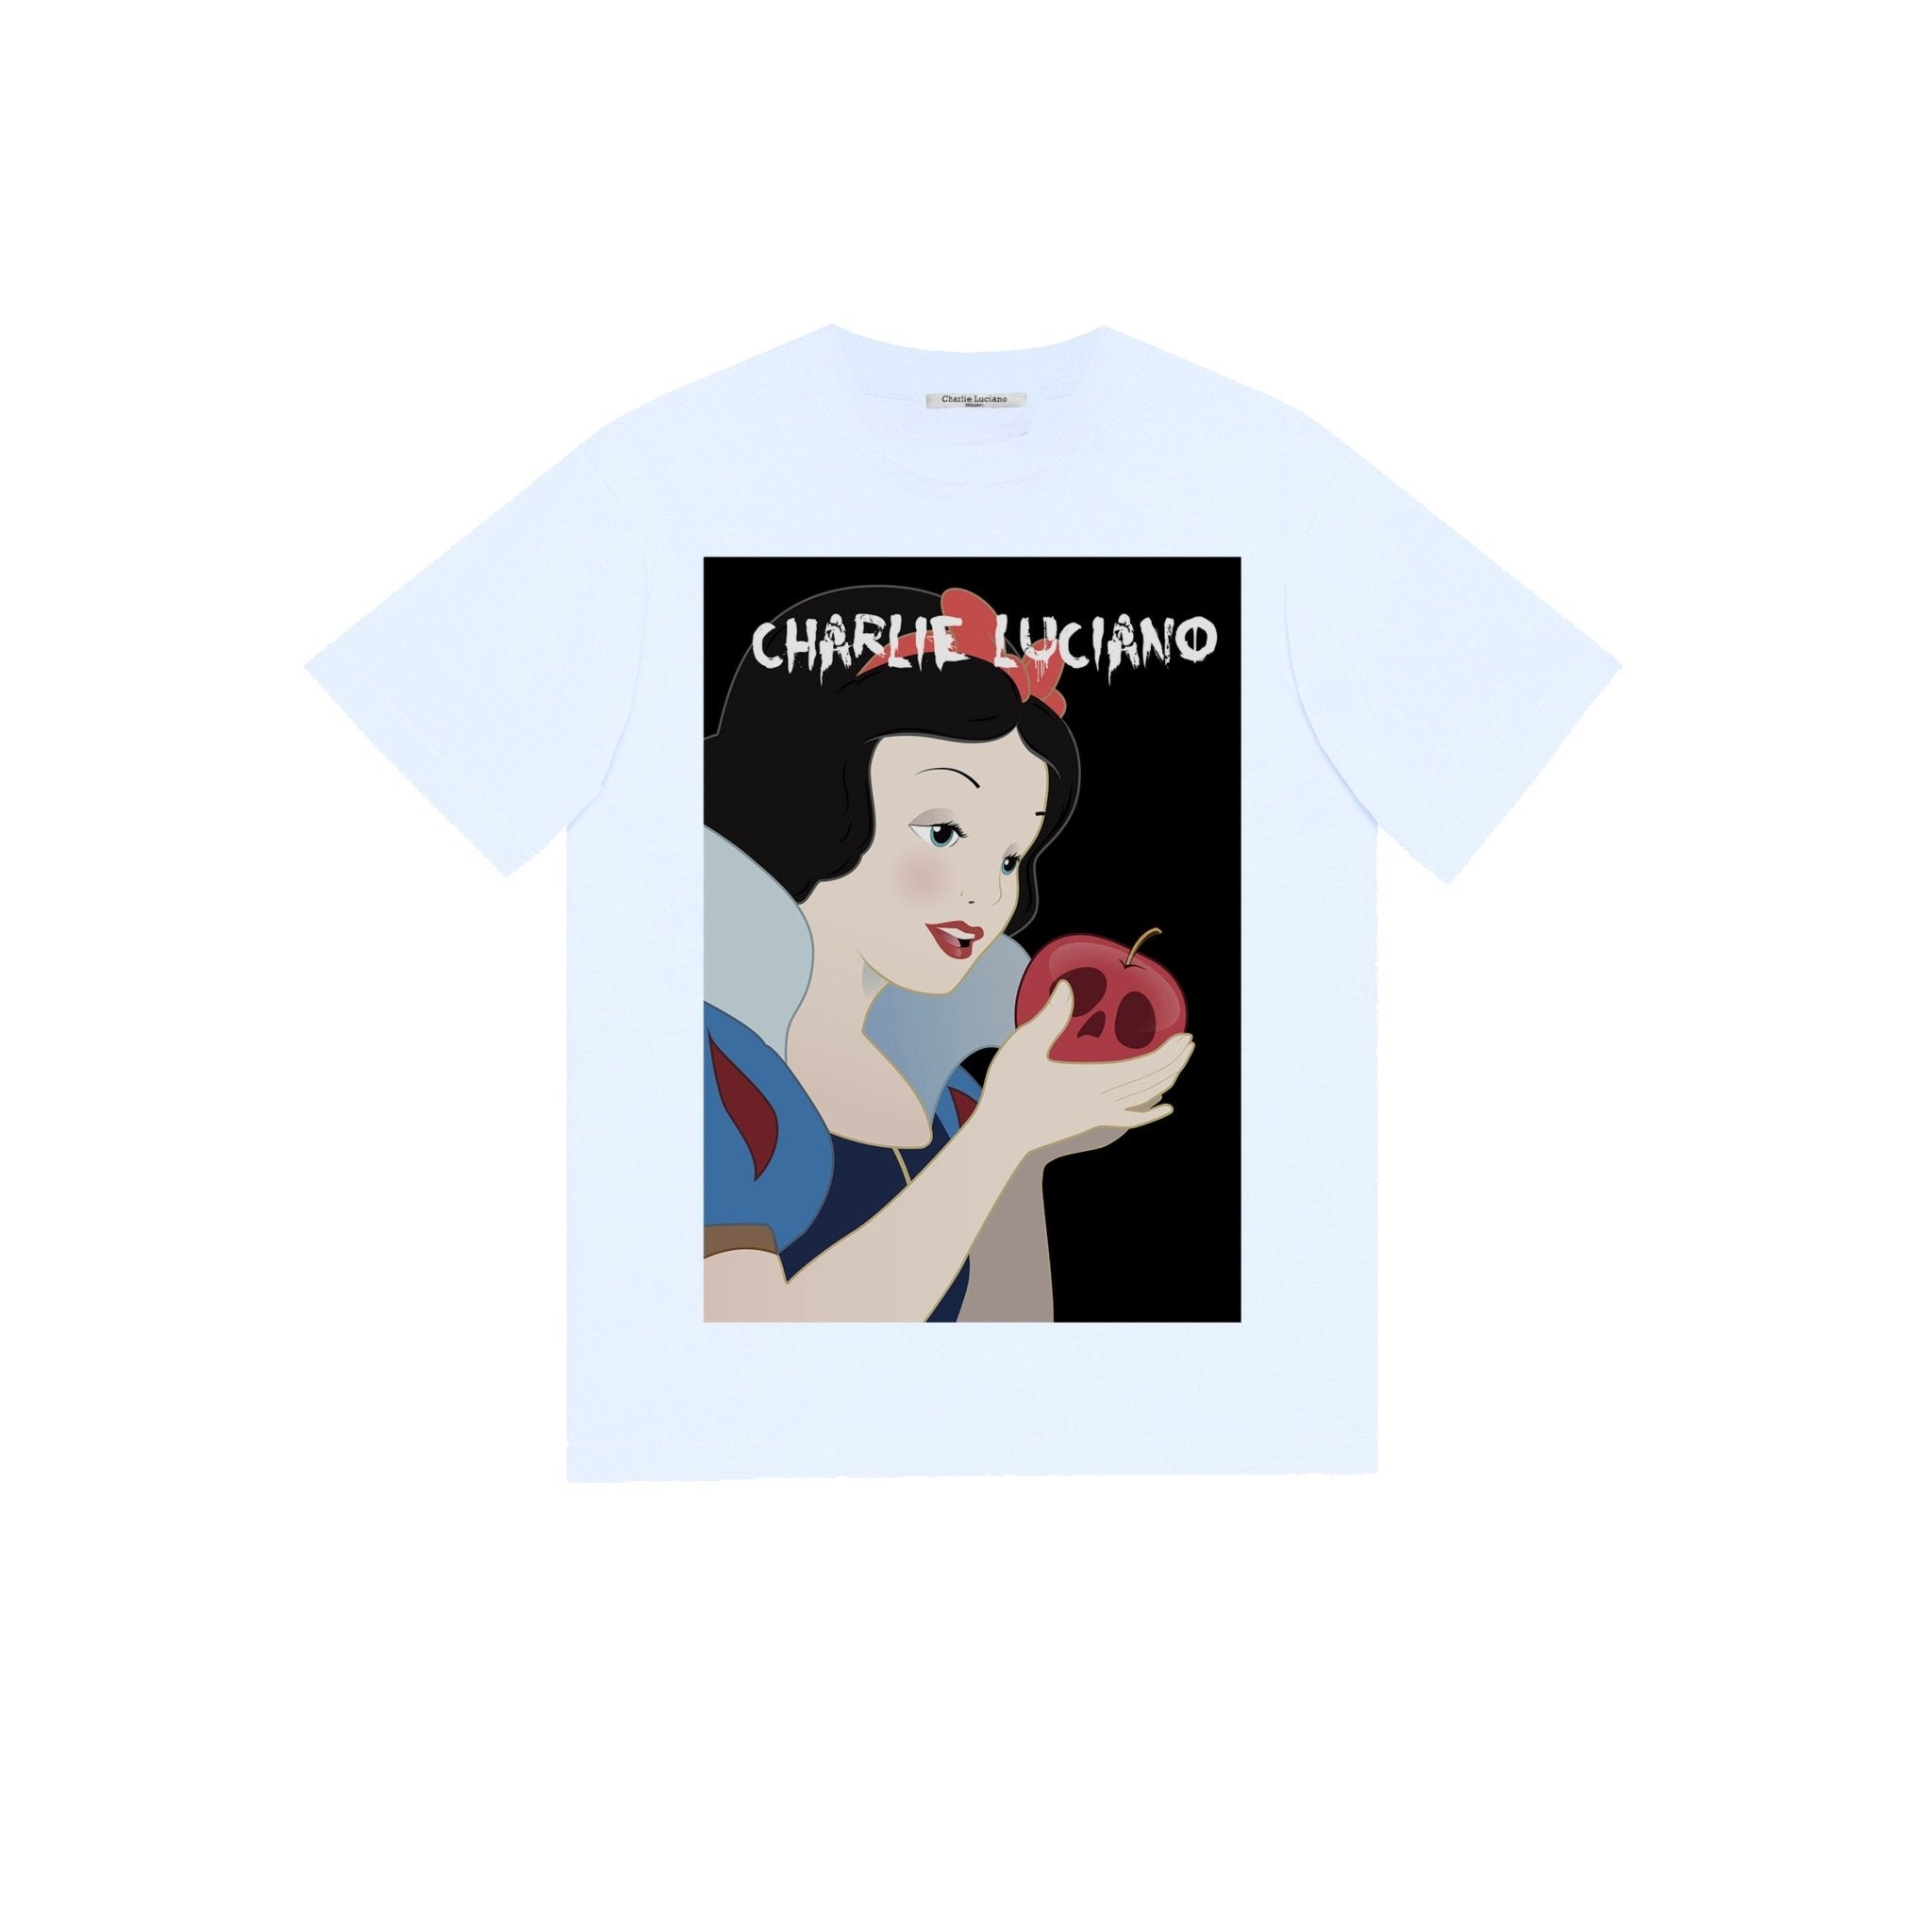 CHARLIE LUCIANO 'Snow White' T-shirt Ver.2 | MADA IN CHINA